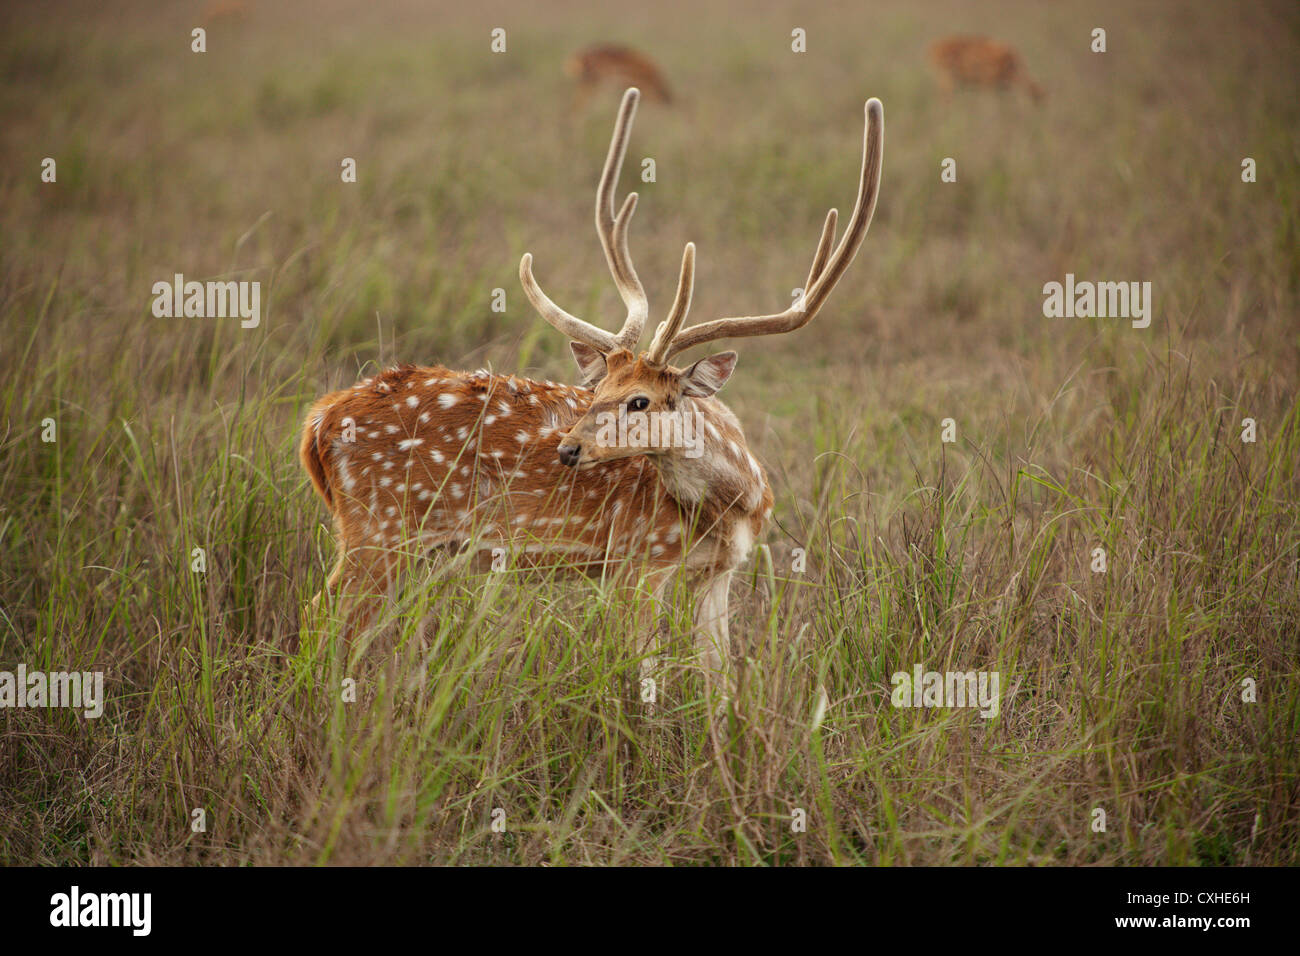 Spotted deer (chital, or axis axis) in Dhikala area in Jim Corbett Tiger Reserve, India. Stock Photo